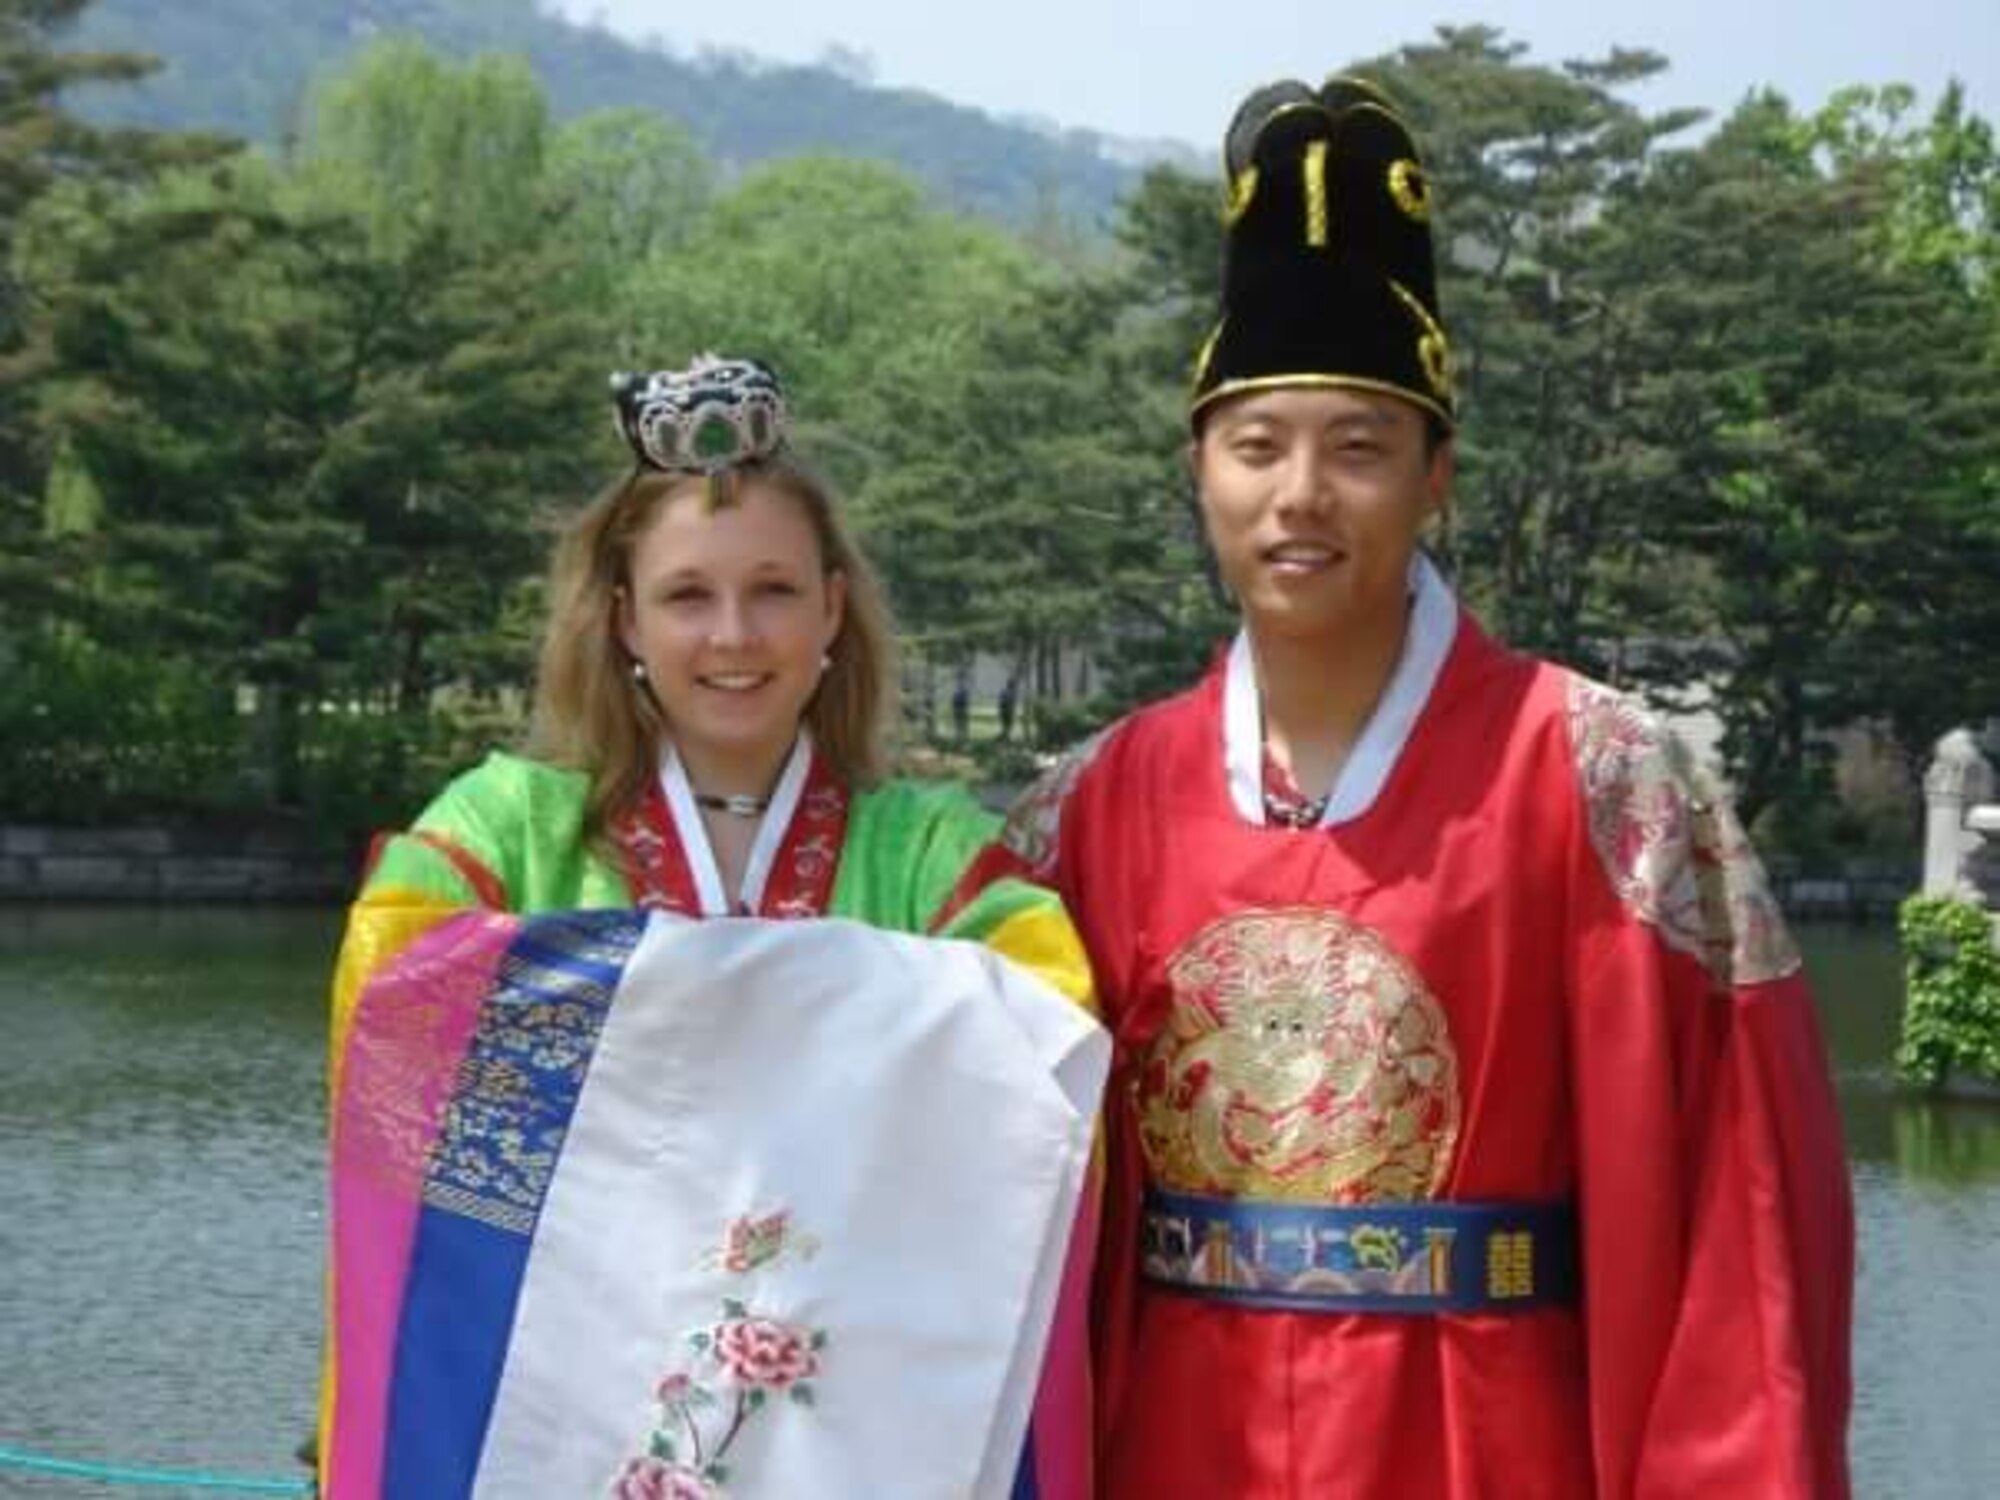 Second Lt. Nadine Suh, 22nd Medical Support Squadron TRICARE Operations and Patient Administration flight commander, and Tech. Sgt. Young Suh, 22nd Contracting Squadron plans and programs section chief, pose in traditional Korean garments in 2007. Nadine grew up in a small town in Germany before meeting and eventually marrying Young, who was born in South Korea, while he was stationed in Germany for his first assignment after enlisting in the Air Force. (Courtesy photo)